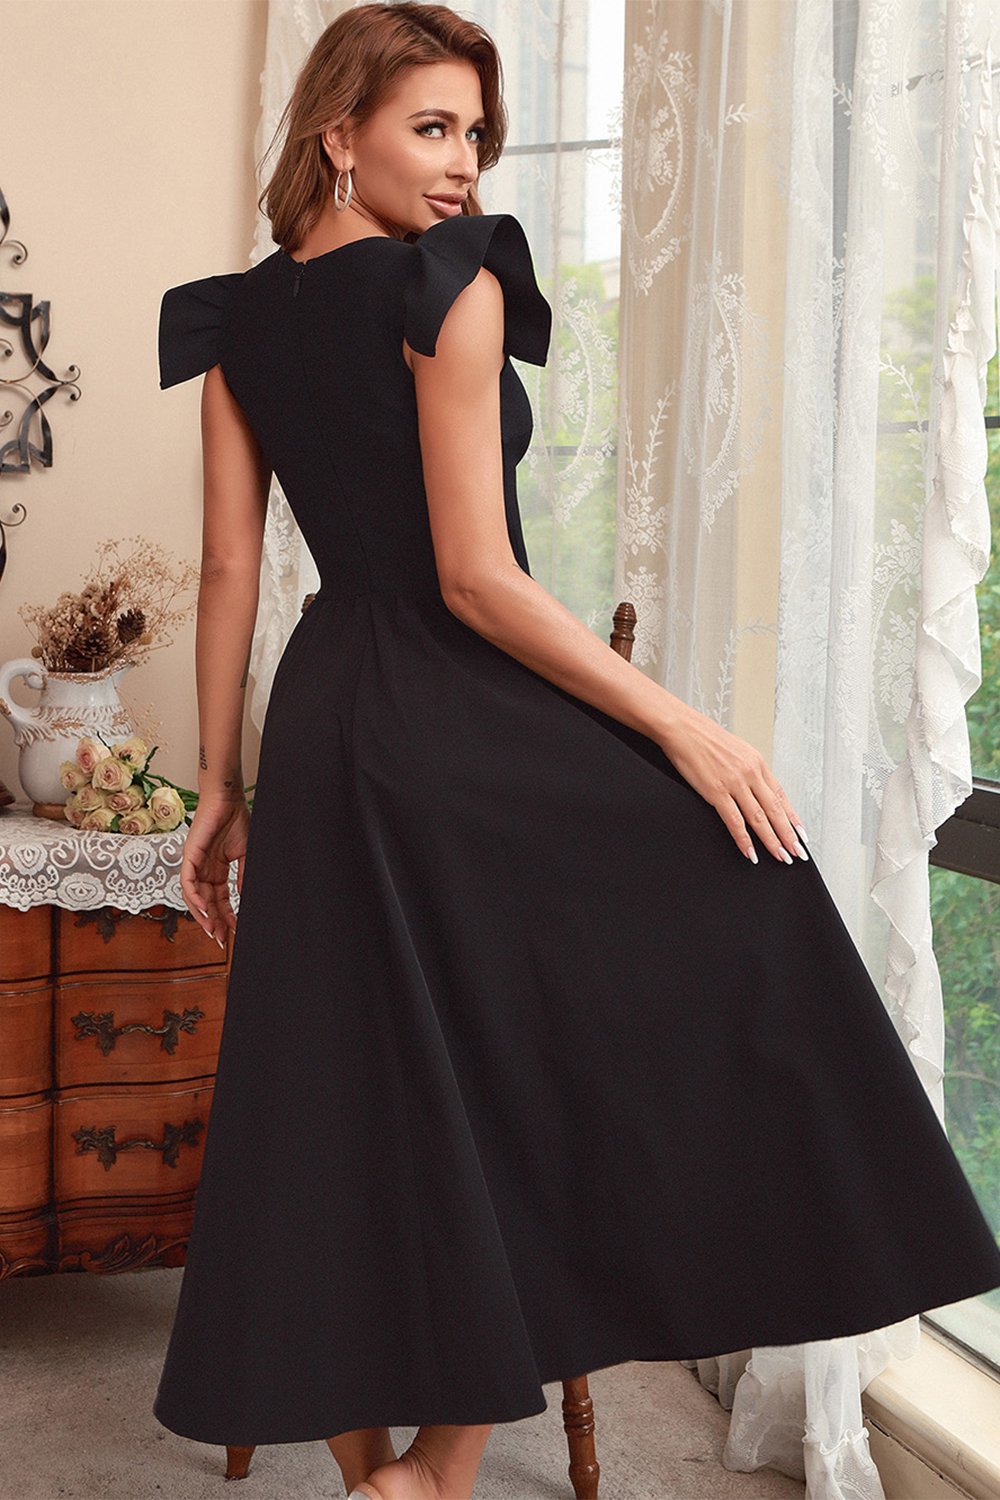 Cap-Sleeved A-Line Semi-Formal Party Dress